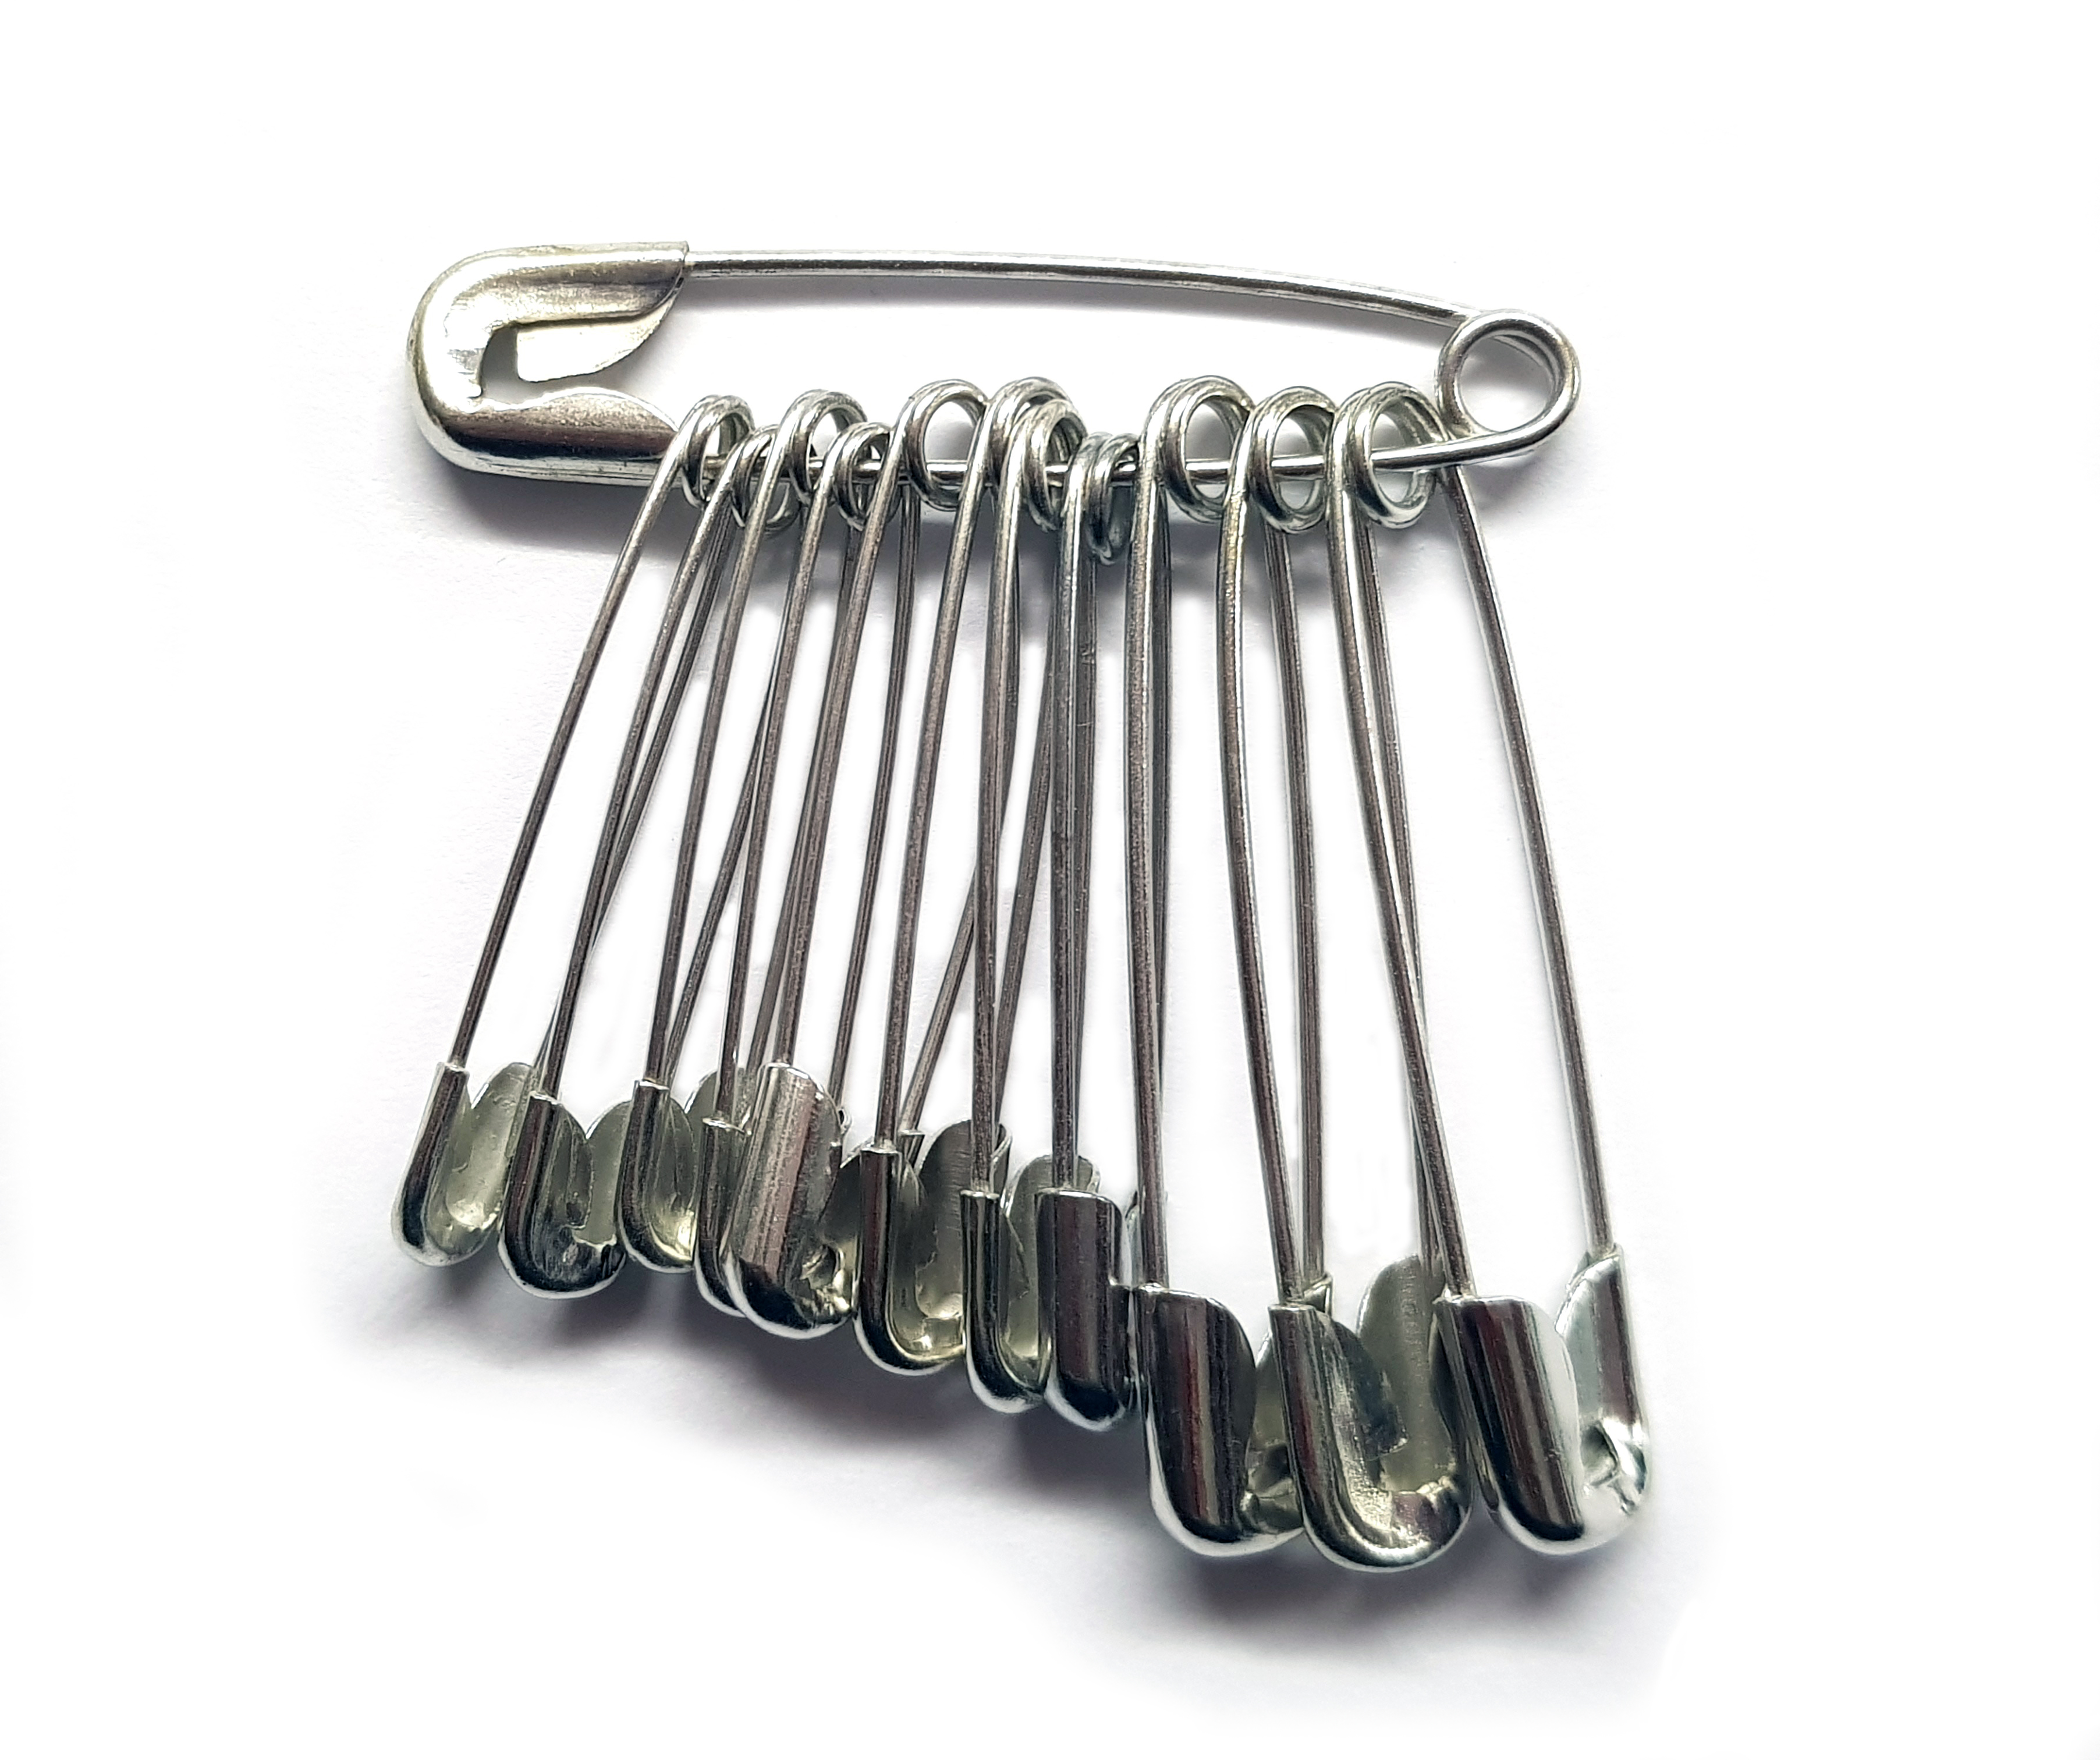 27mm, 34mm, 38mm Assorted Nickel Safety Pins